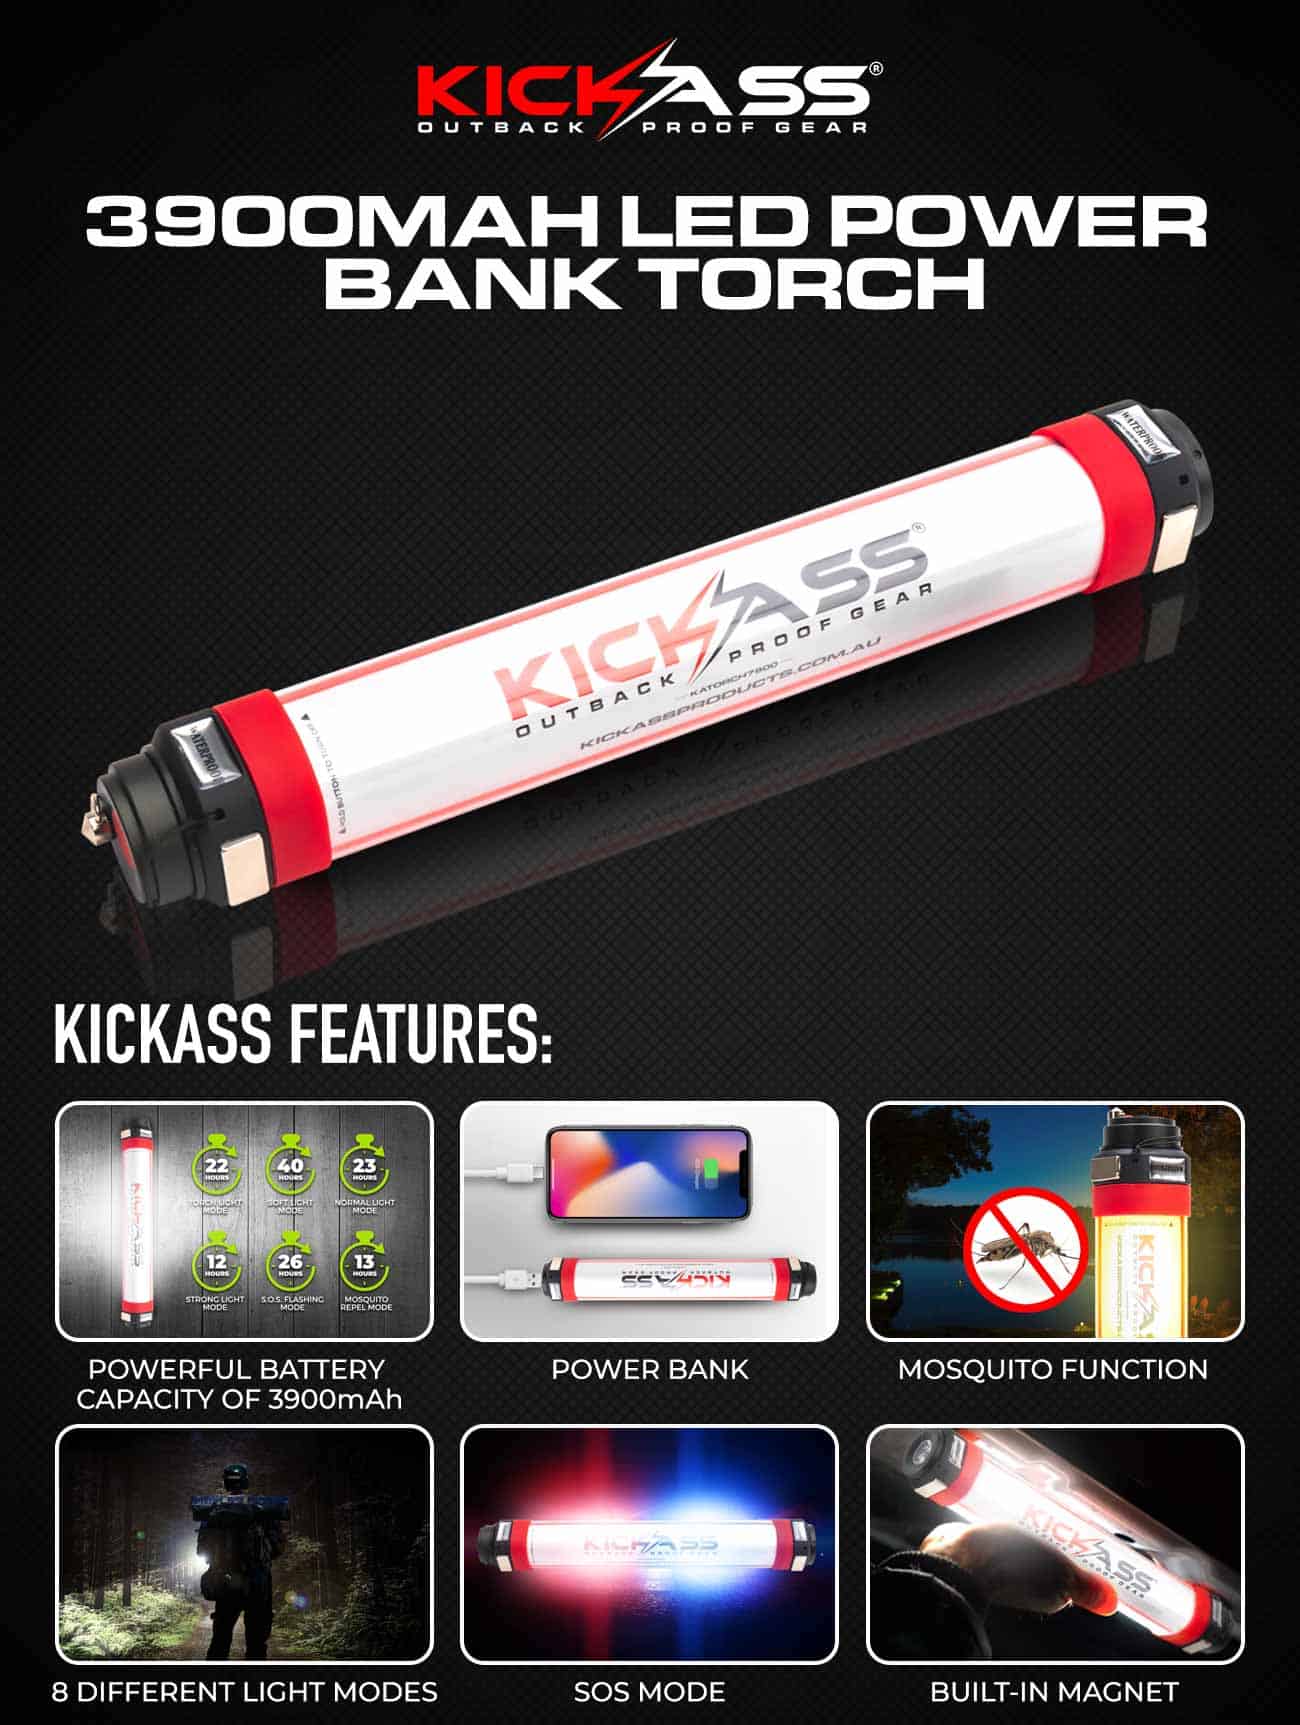 Torch Light Large Power Bank Rechargeable